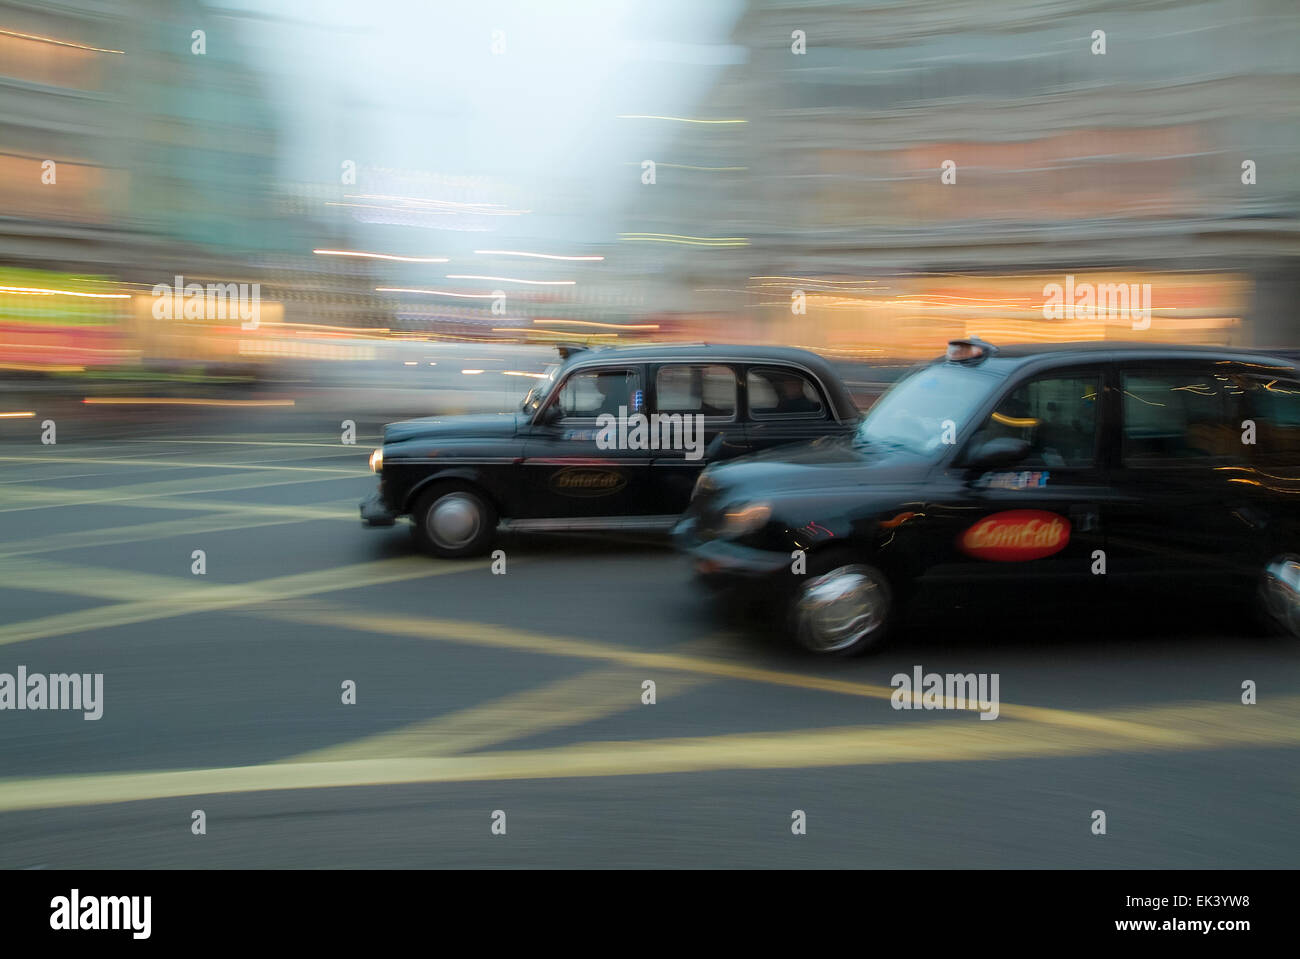 Two Taxi cab panning  in London England United Kingdom Europe Stock Photo